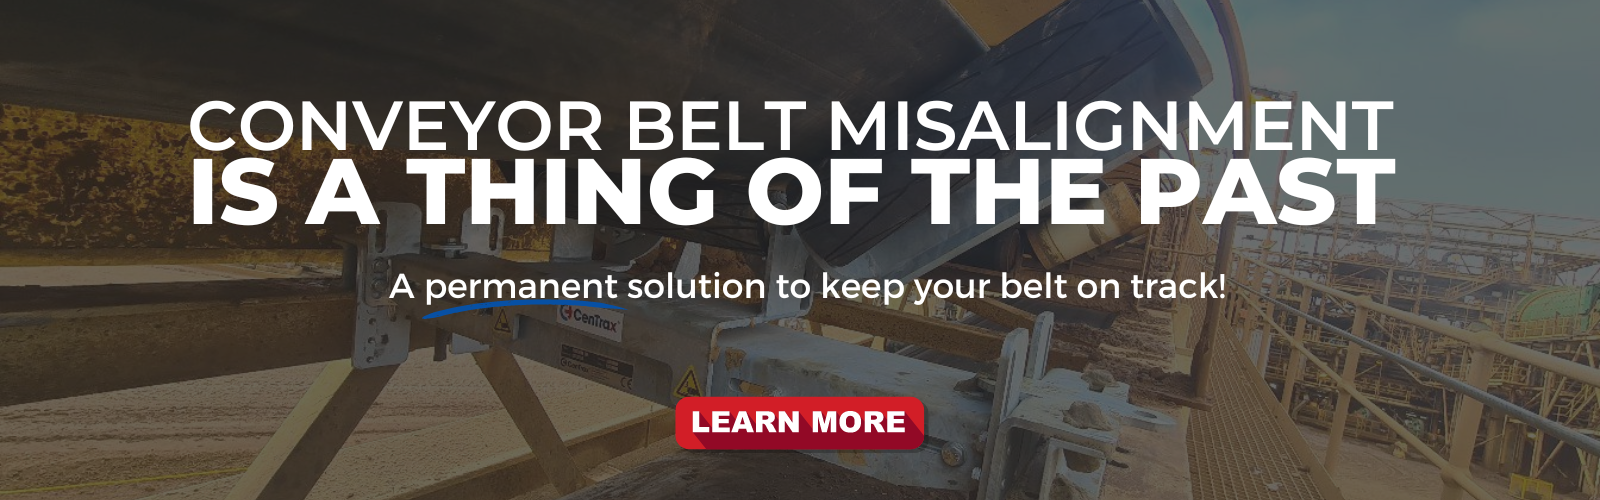 Conveyor Belt Misalignment is a thing of the past!